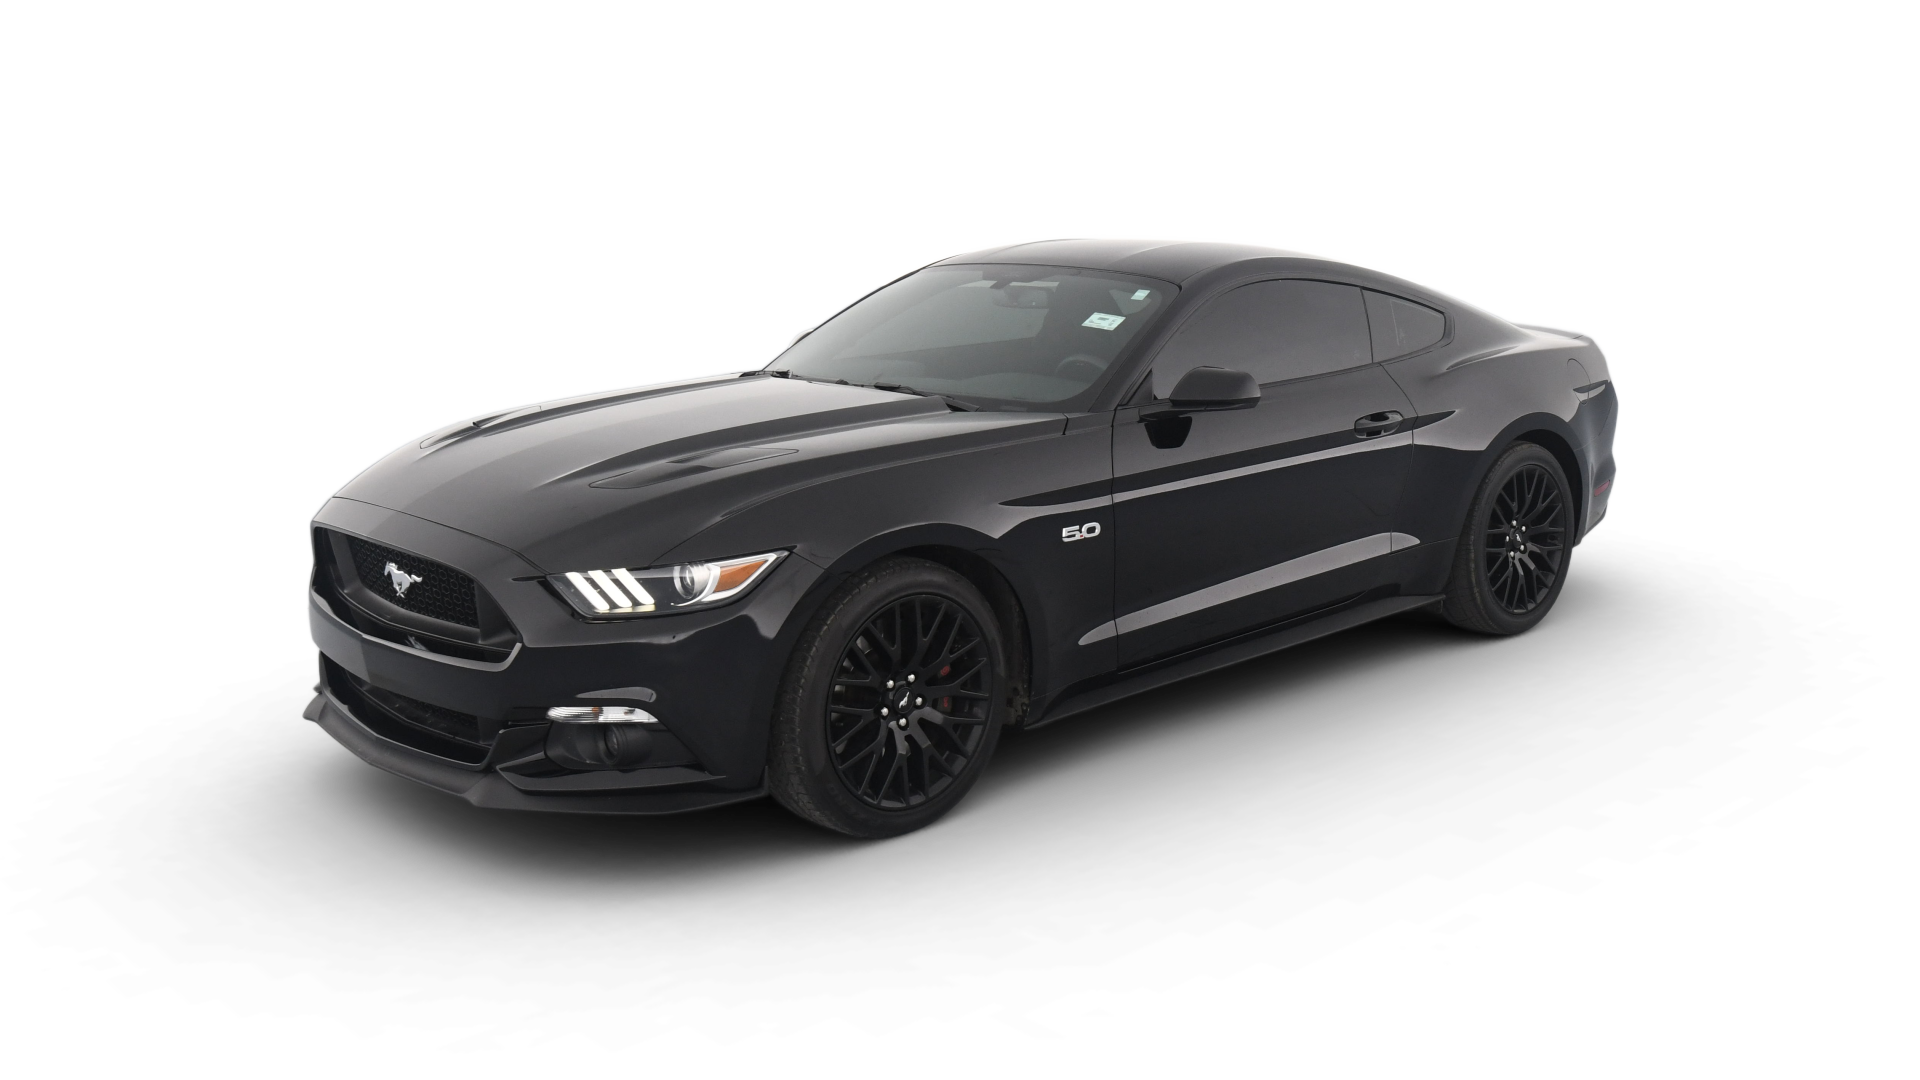 Used 2016 Ford Mustang For Sale Online | Carvana